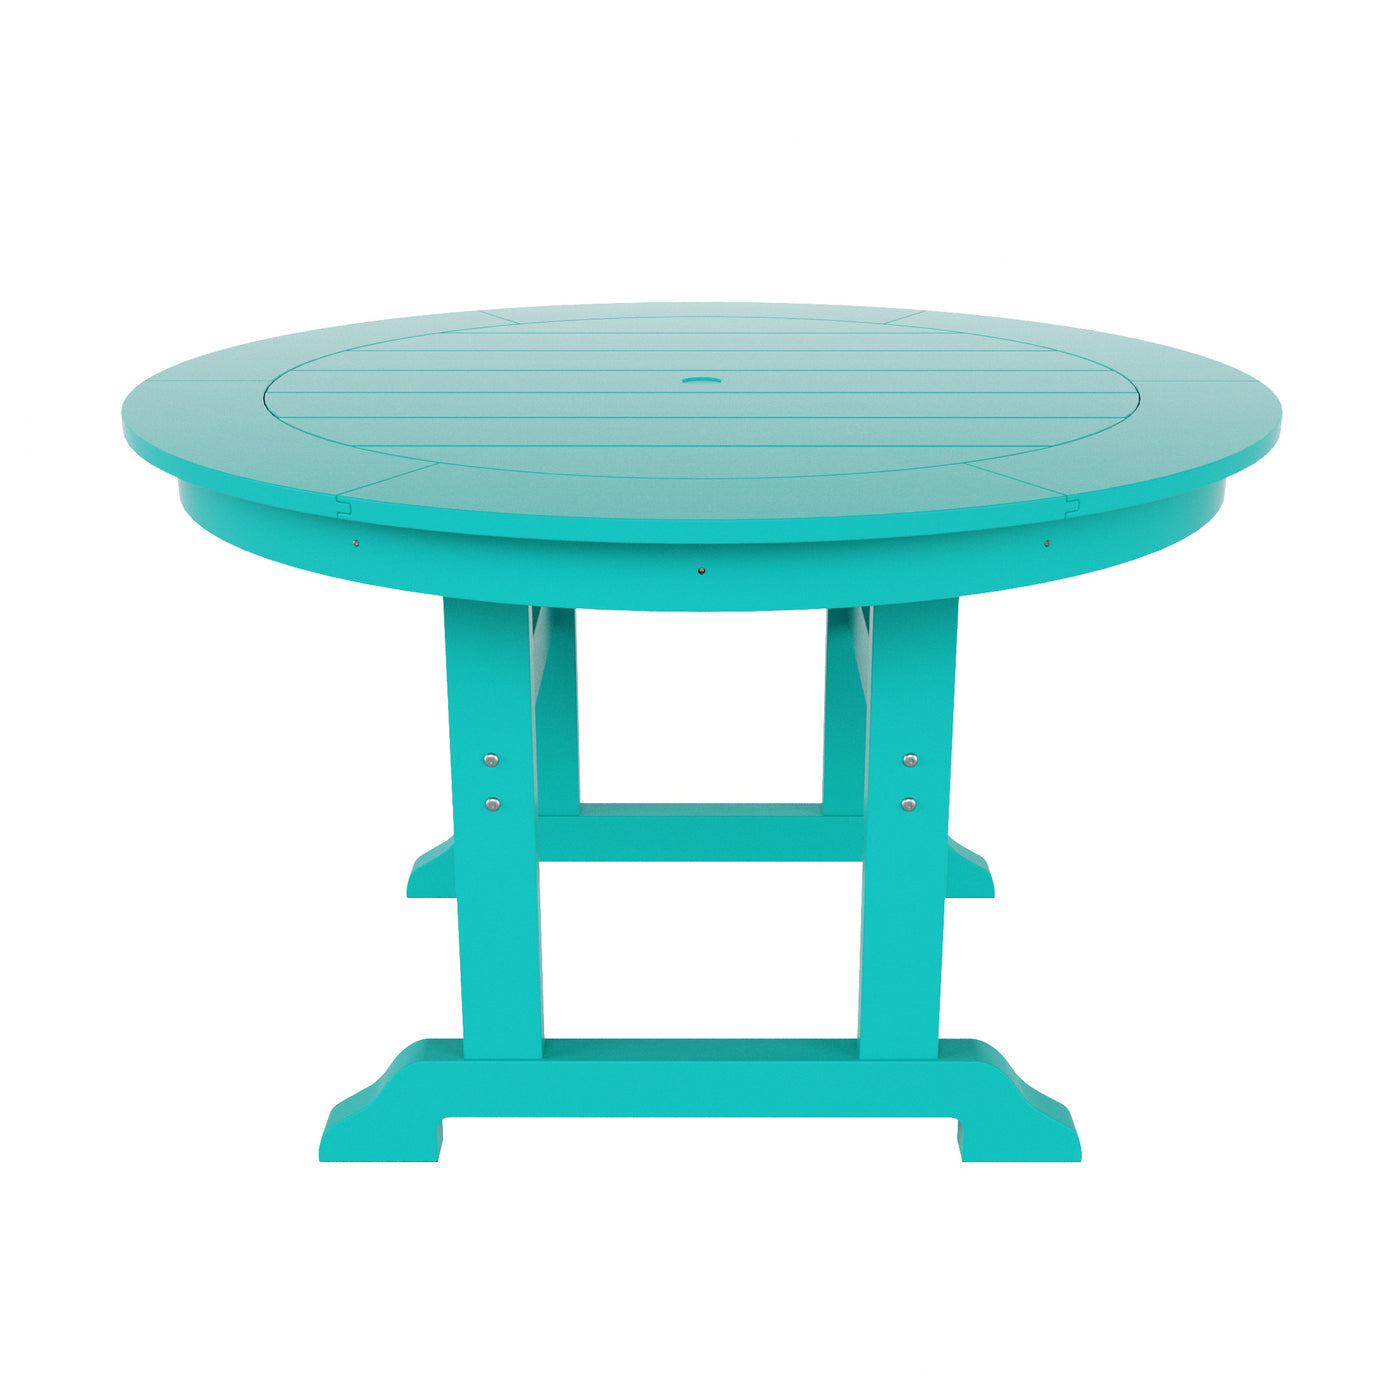 Malibu 47" Round Dining Table for Outdoor Patio